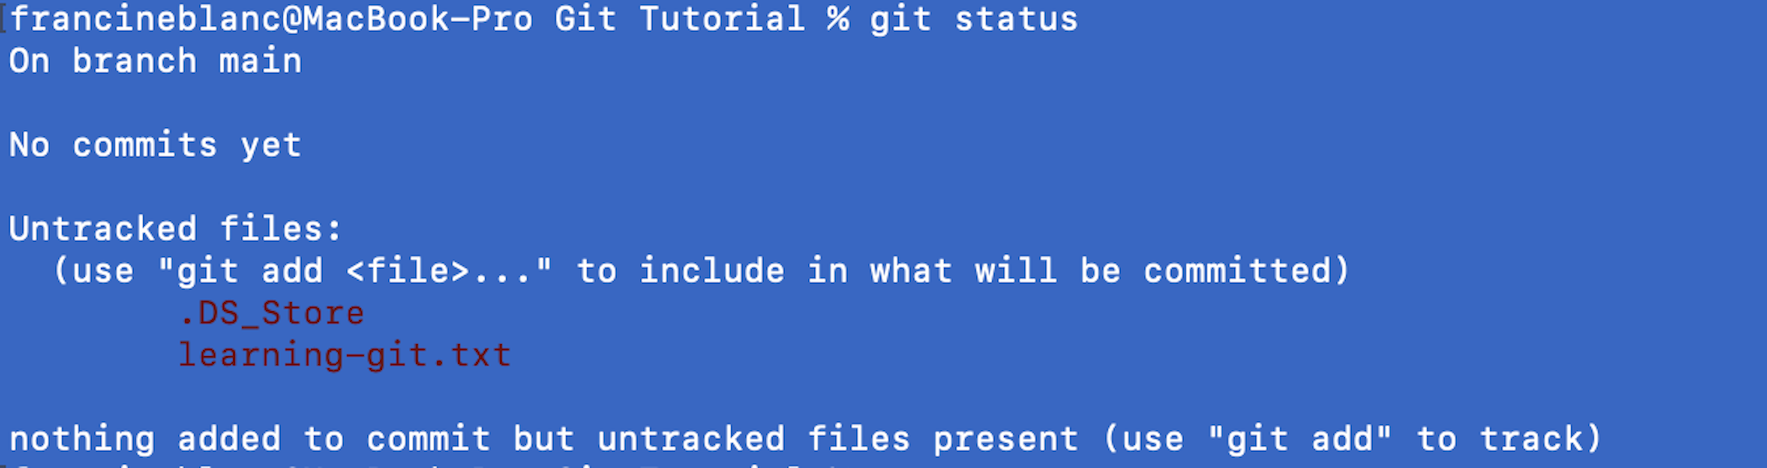 Image of git status command being run for untracked files